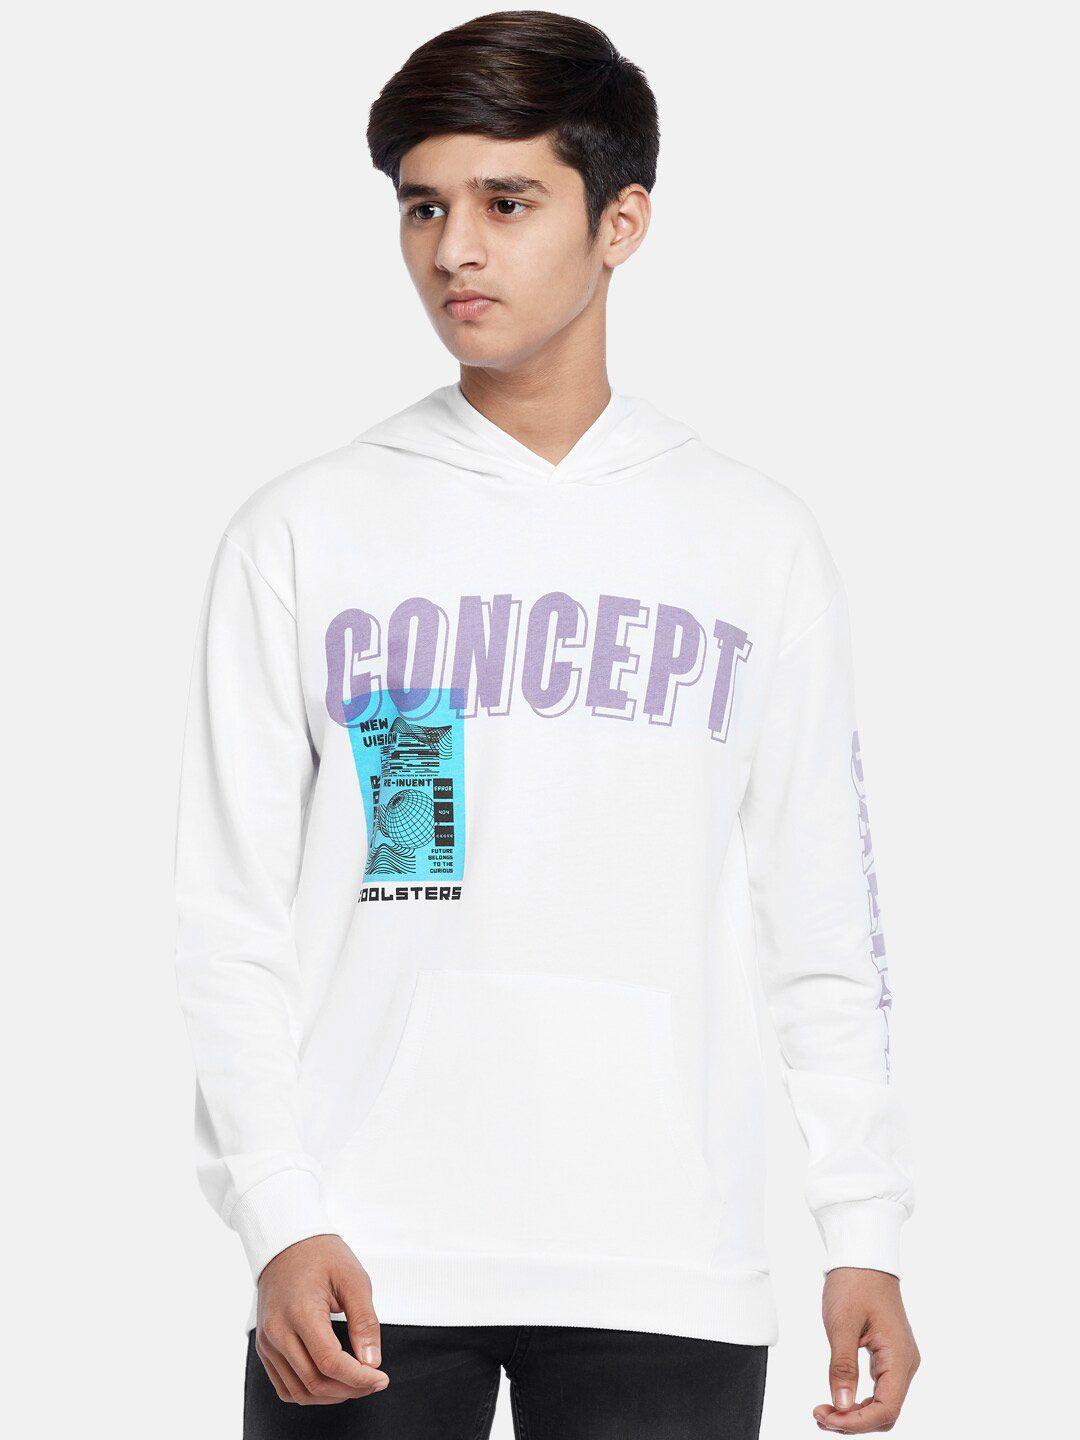 coolsters by pantaloons boys white printed cotton sweatshirt